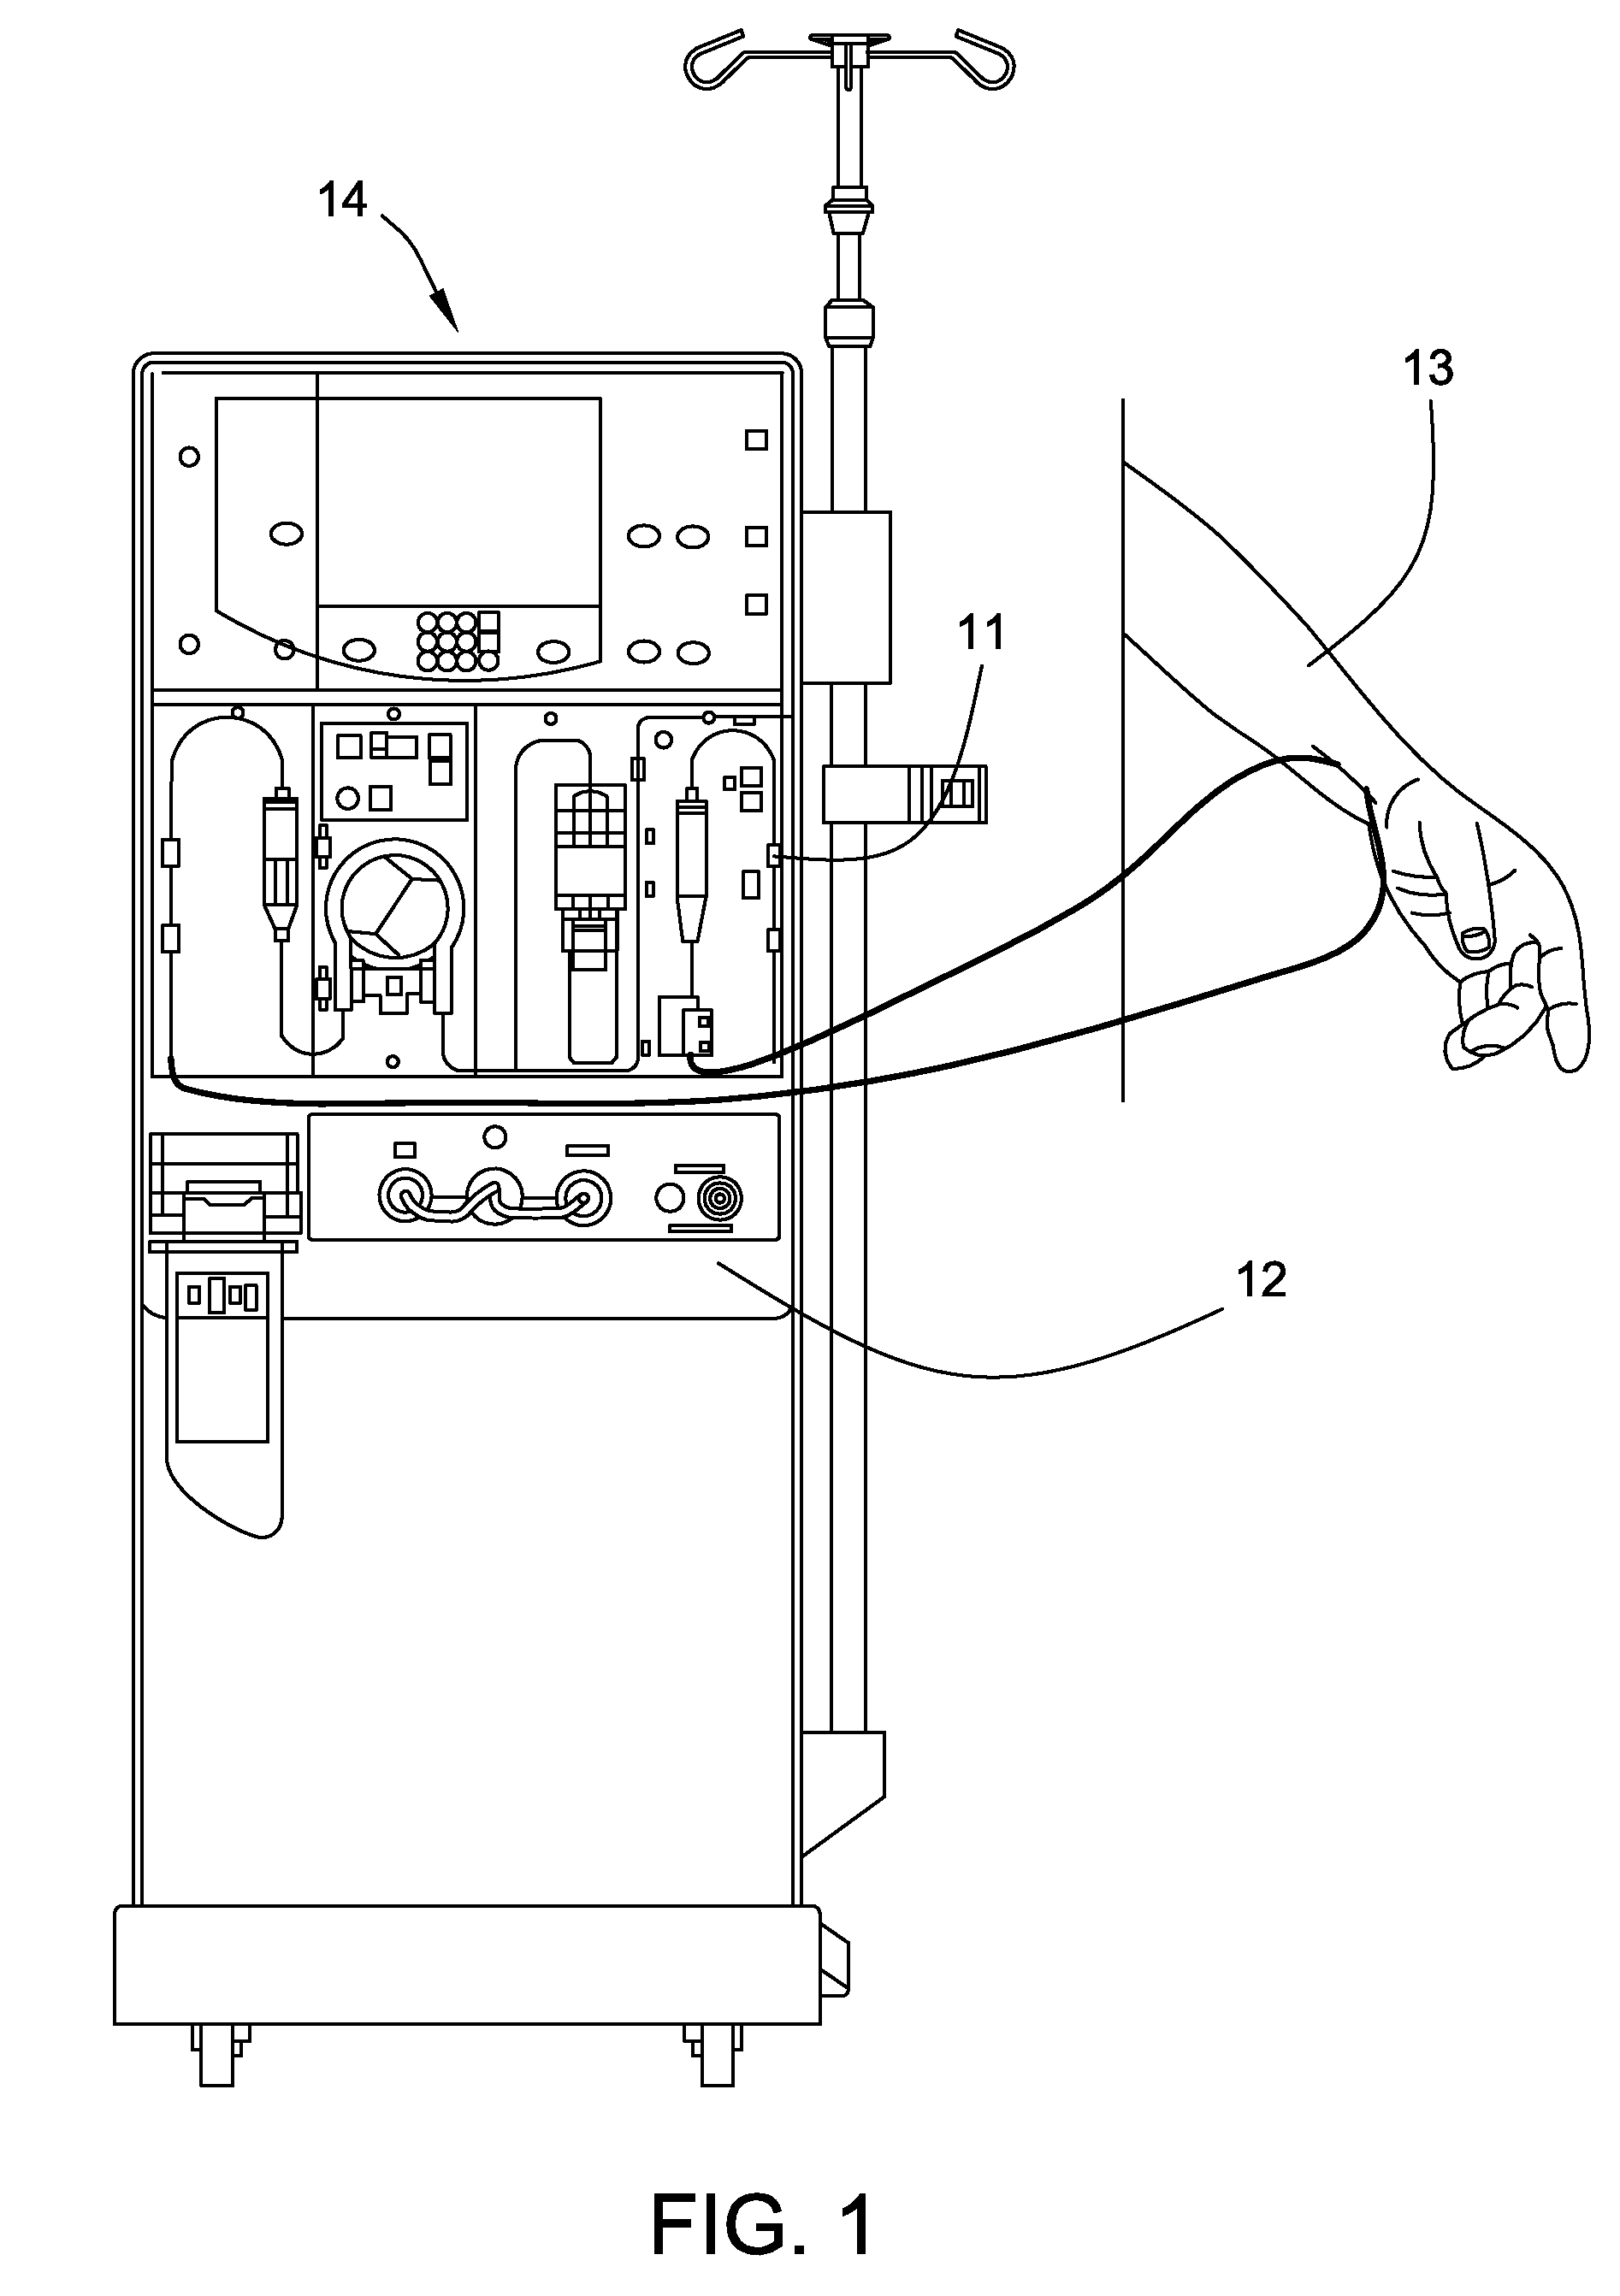 Method for removing gases from a container having a powdered concentrate for use in hemodialysis